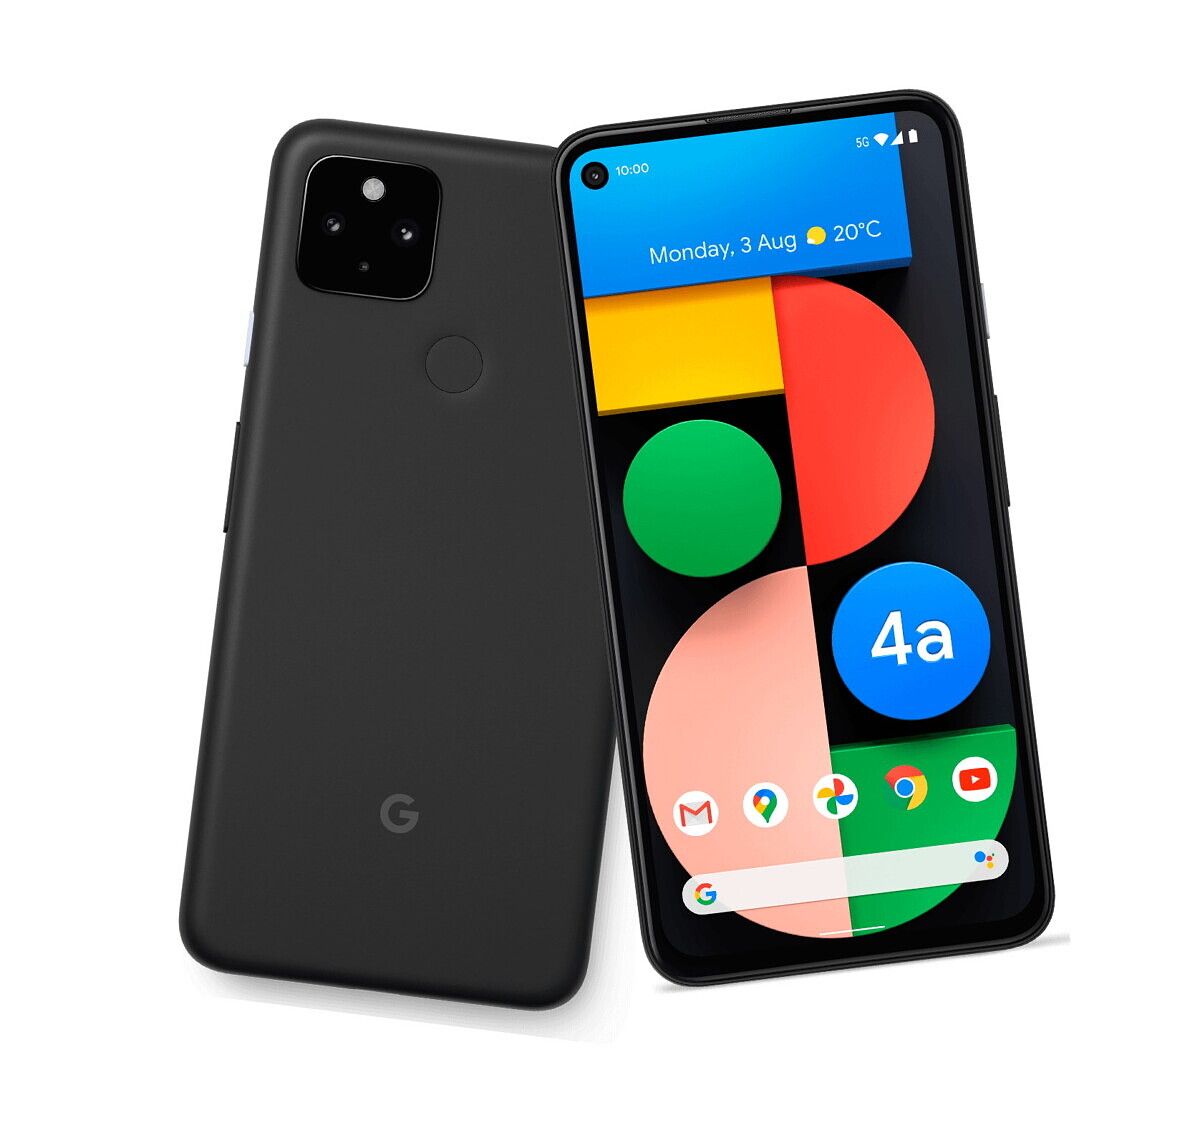 The Clearly White model of the Google Pixel 4a 5G is available to puchase!